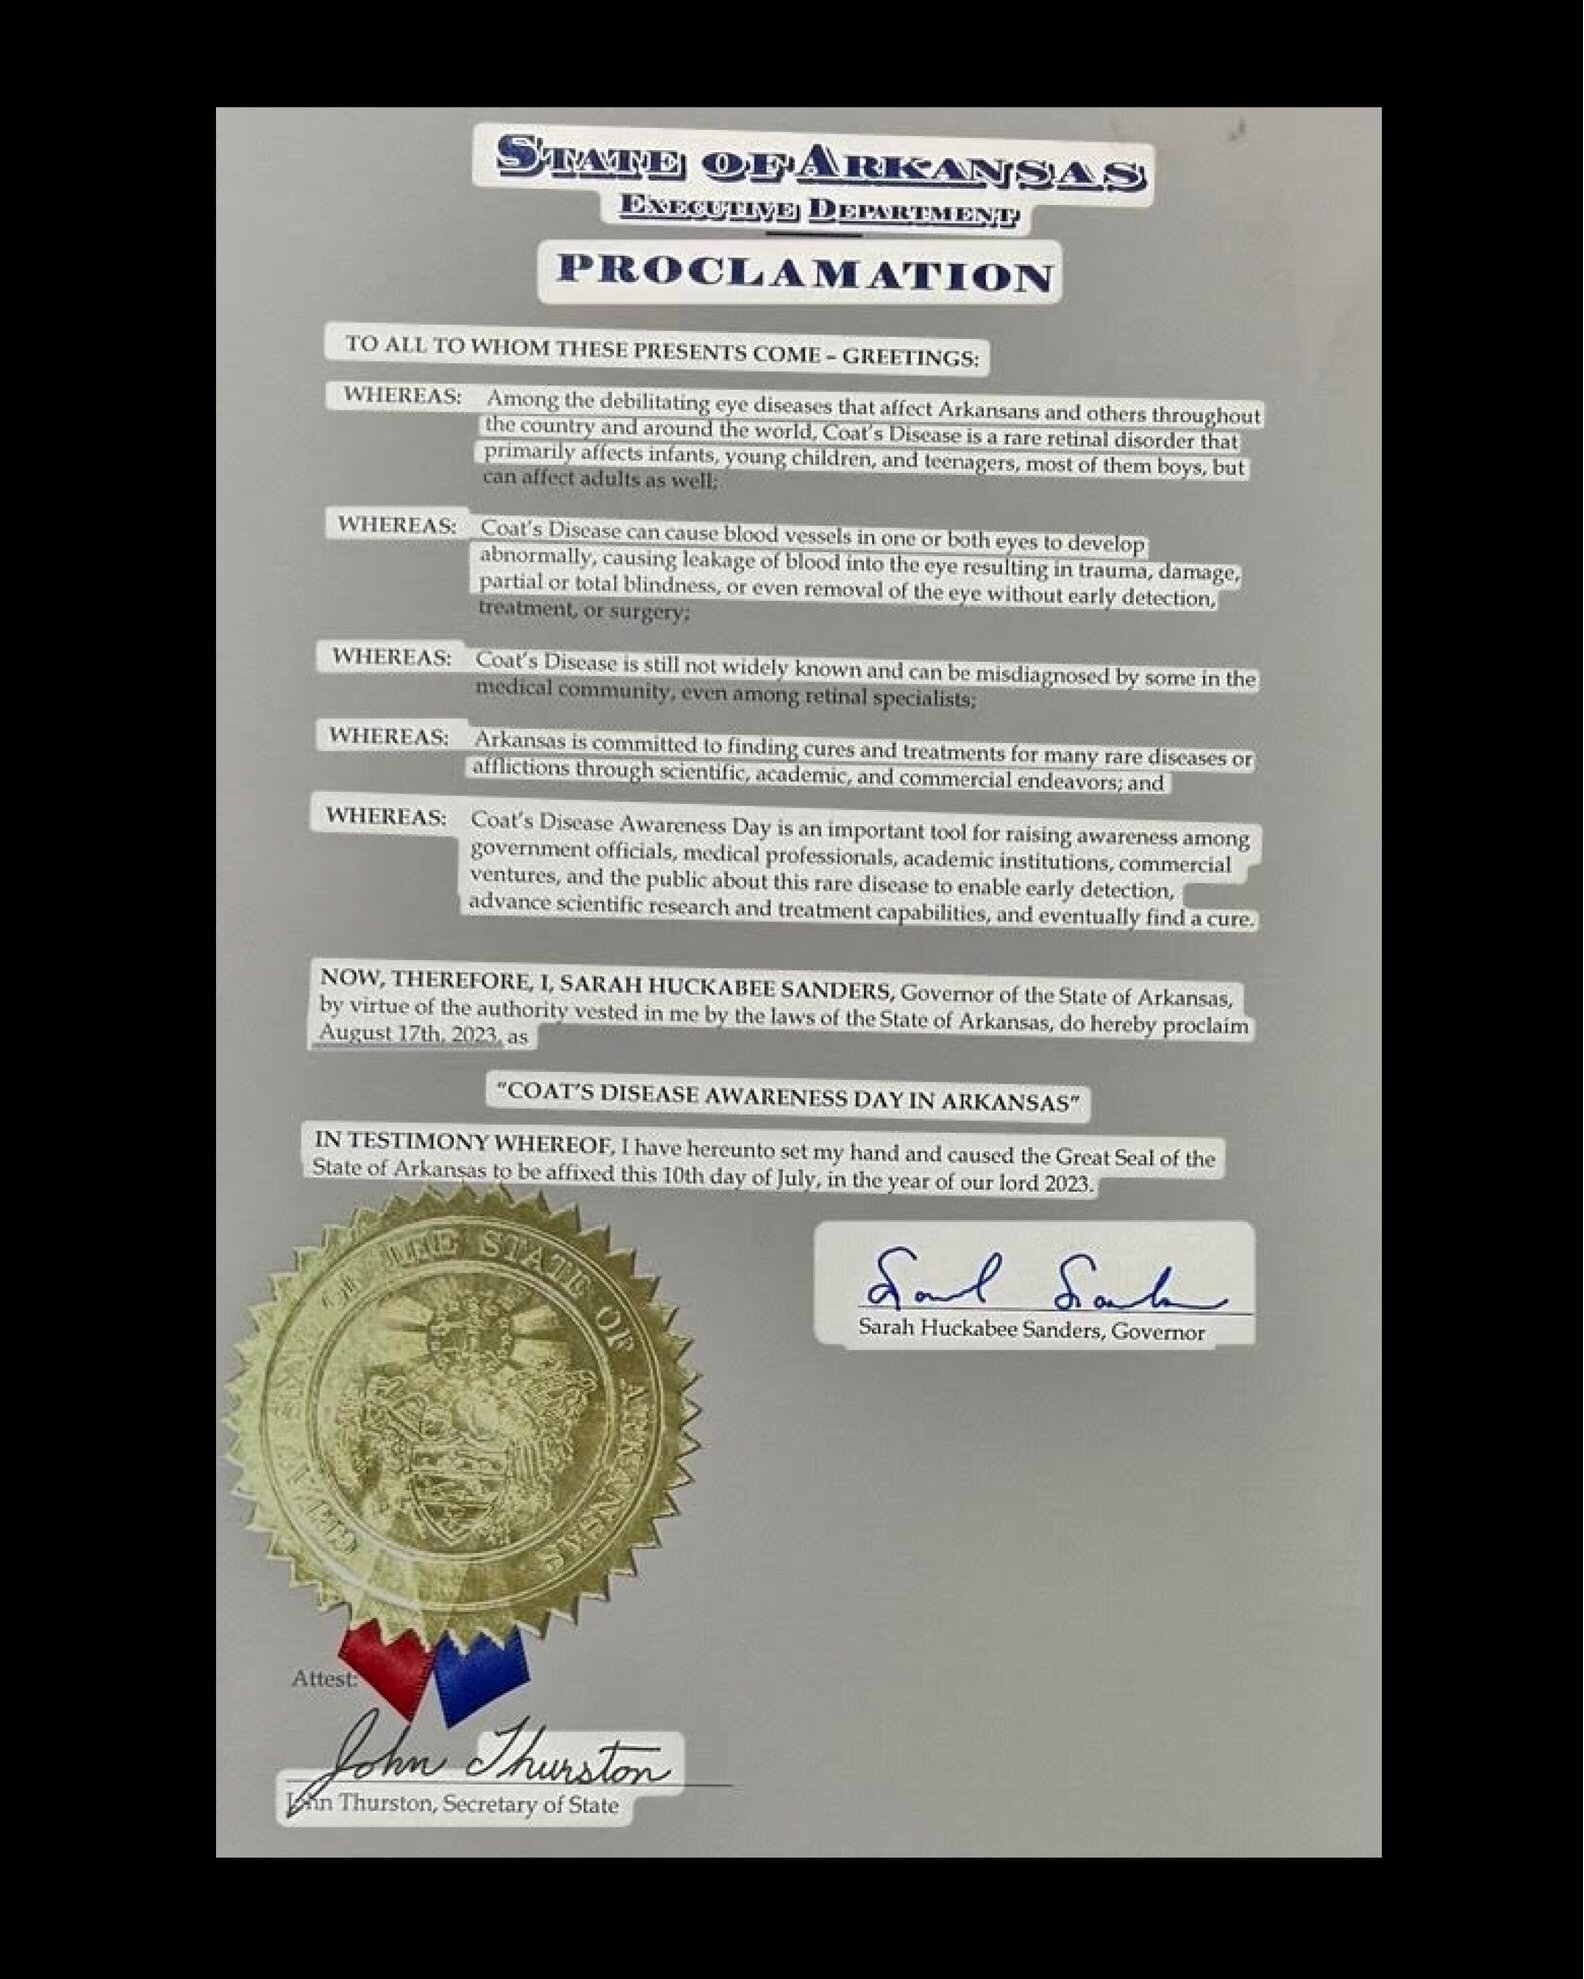 Way to go, Arkansas! Congratulations on becoming the 10th state to declare August 17 as Coats' Disease Awareness Day!

#CoatsDiseaseAwareness #stateproclamations